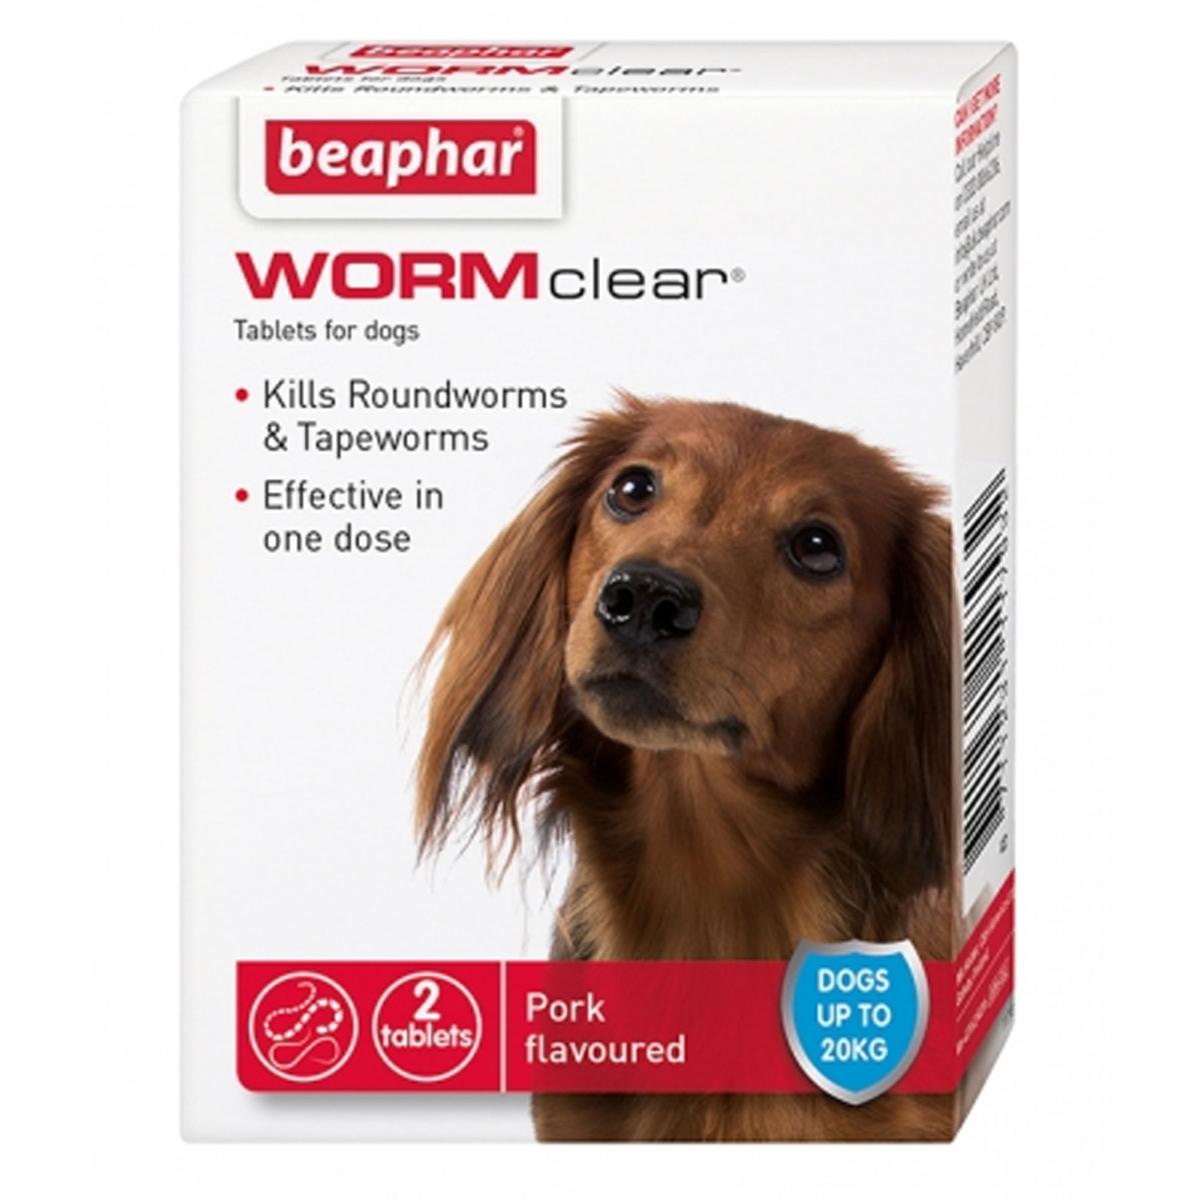 Worming Tablets | Dog Worm Control | Beaphar Wormclear